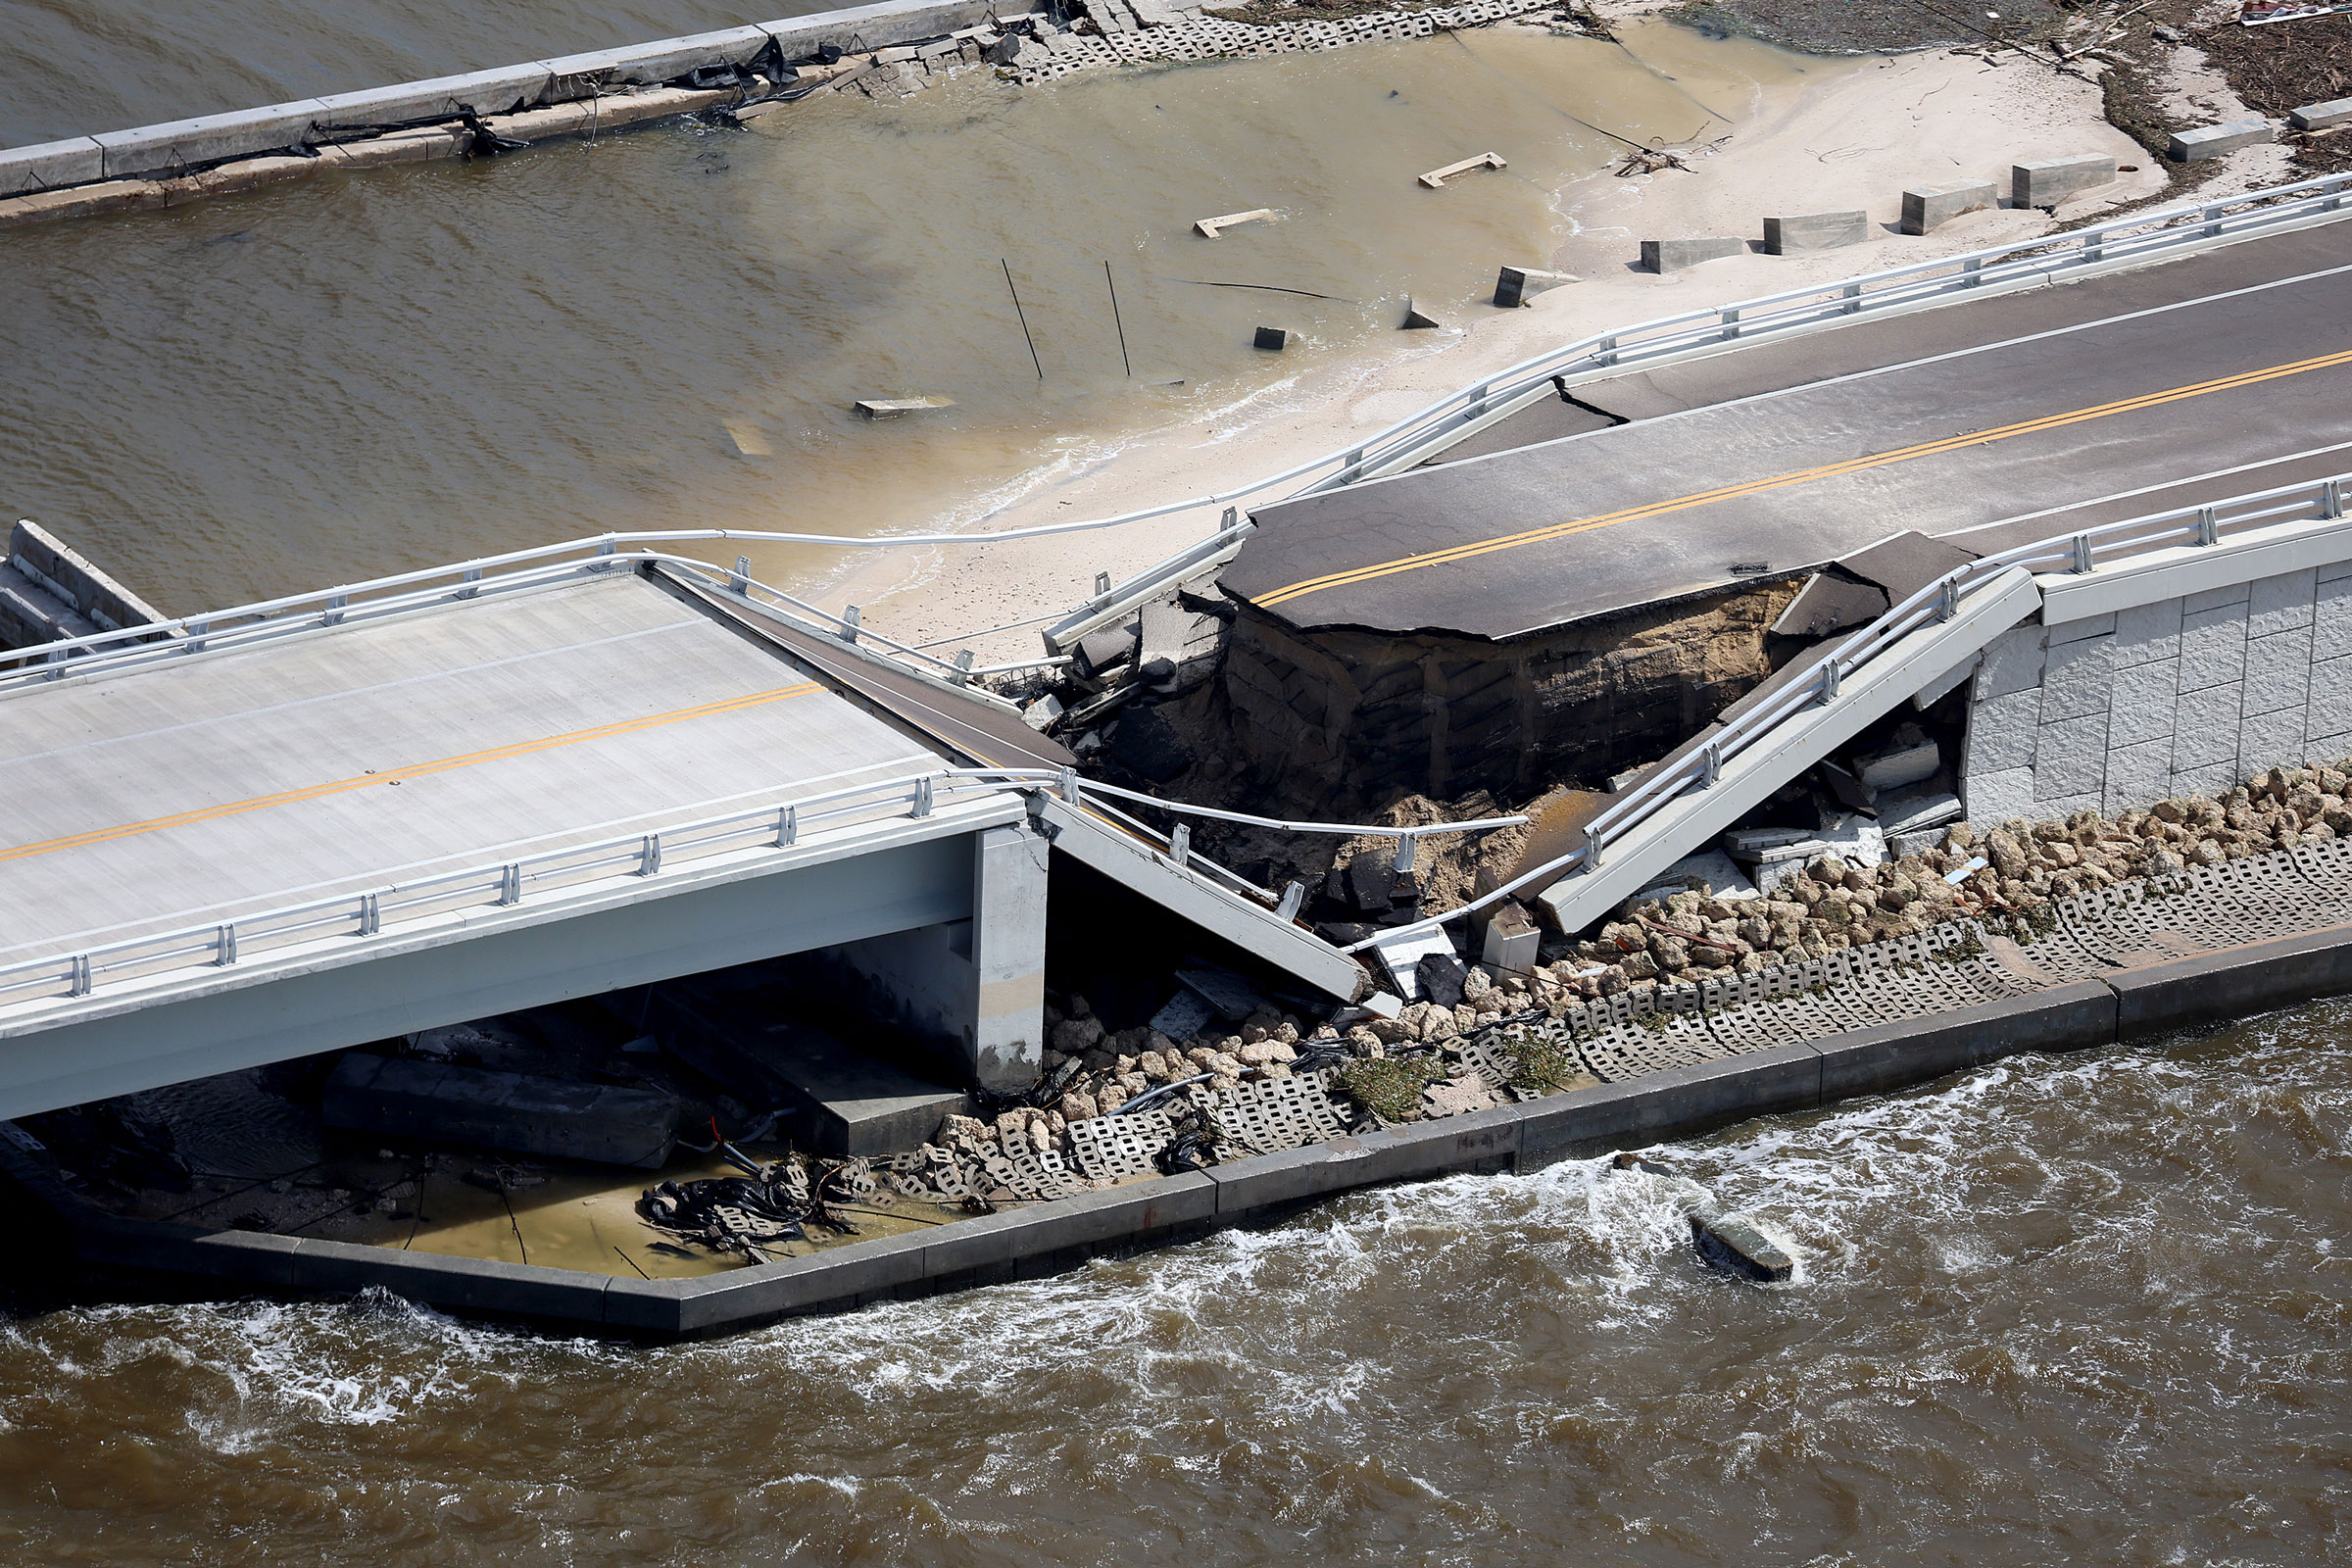 Parts of Sanibel Causeway are washed away along with sections of the bridge after Hurricane Ian passed through the area on Sept. 29, 2022, in Sanibel, Fla. (Joe Raedle—Getty Images)